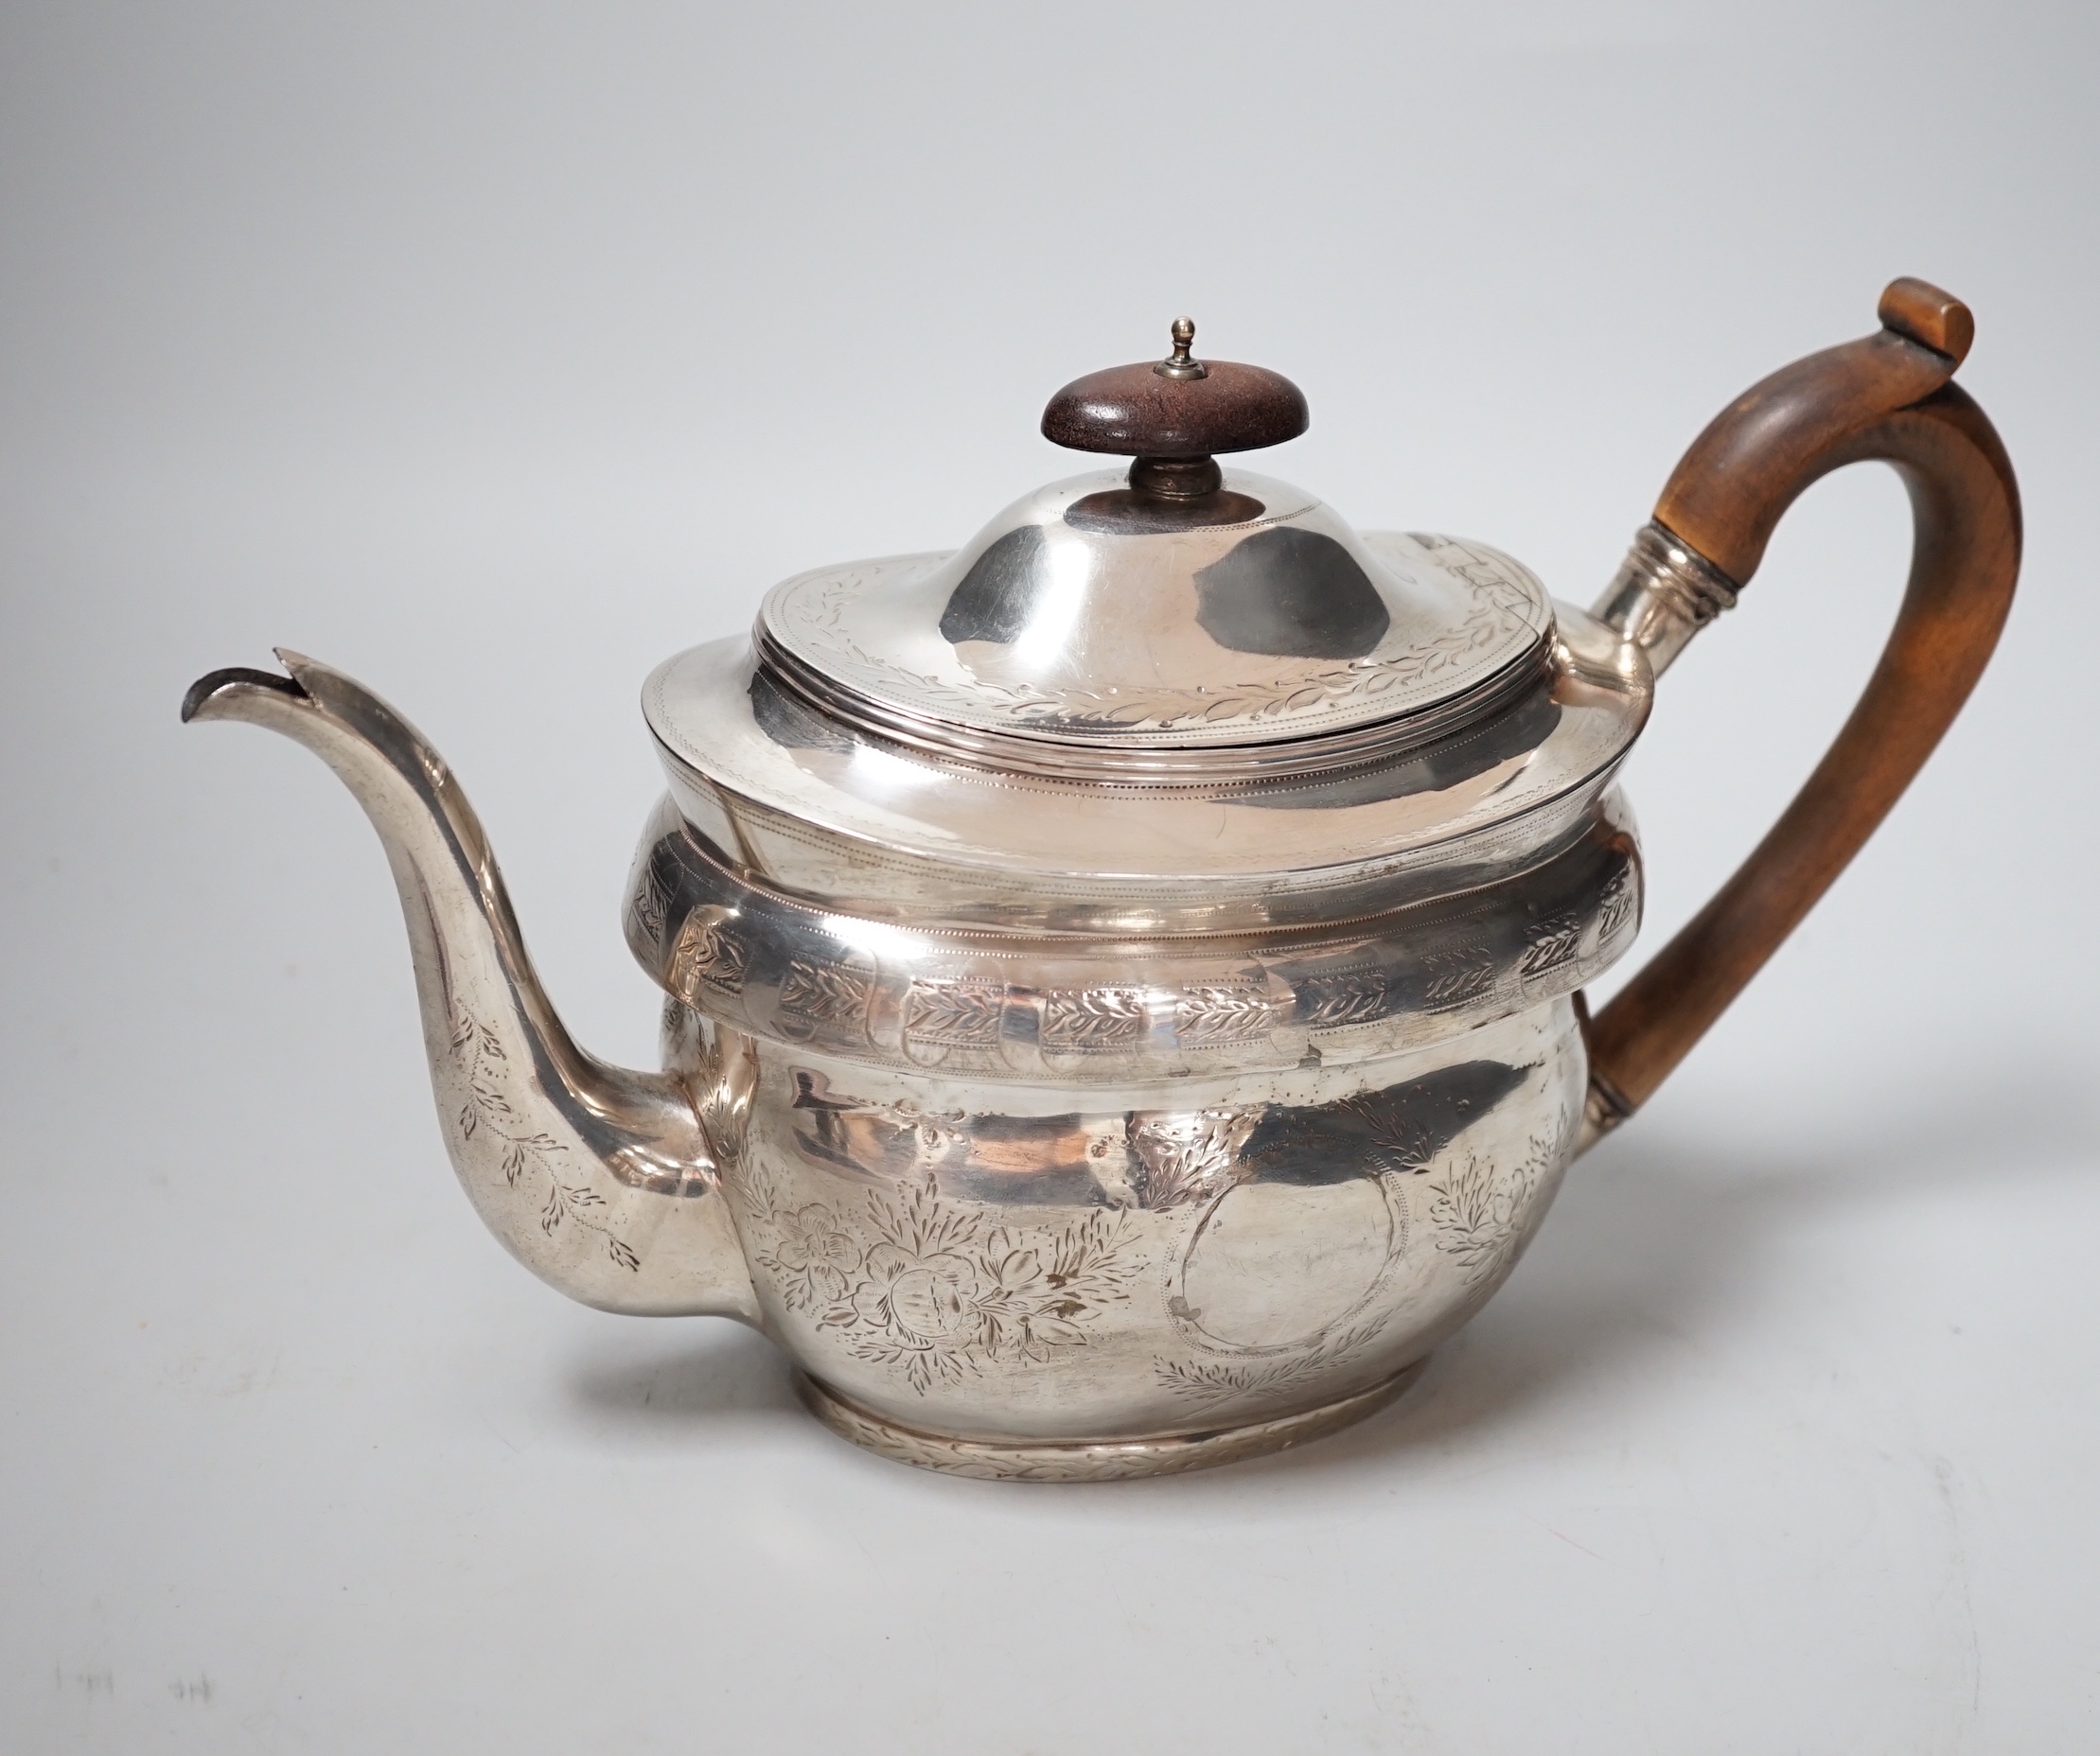 A George III engraved silver oval teapot, by Robert & Samuel Hennell, London, 1803, (repairs), gross weight 12.7oz.